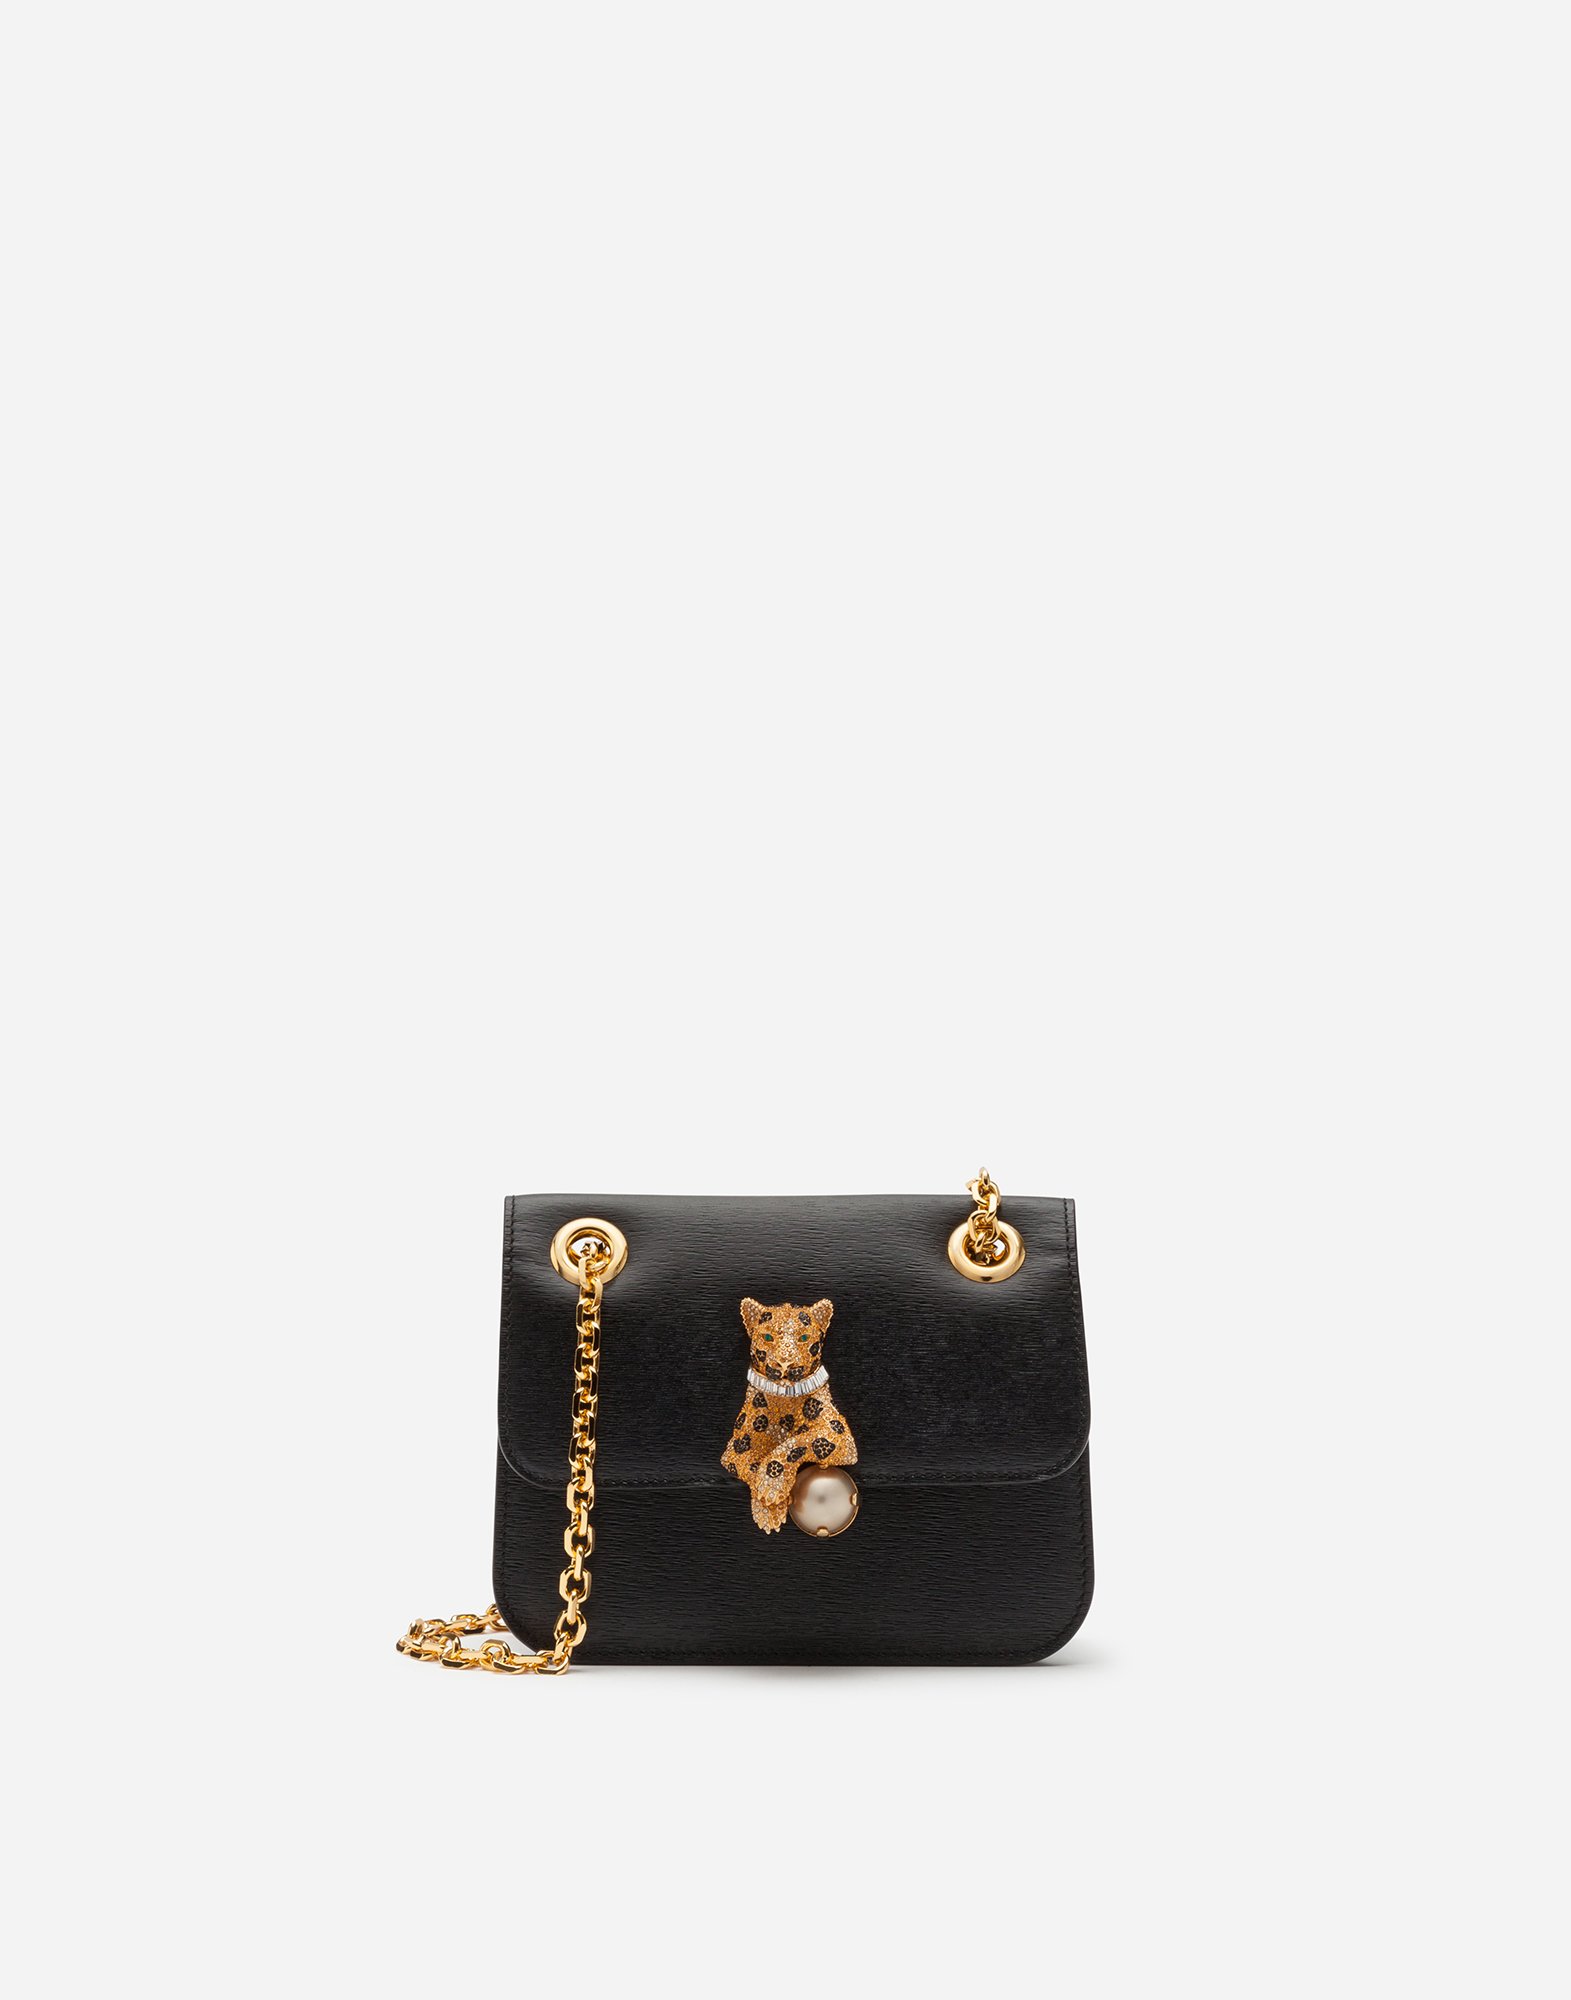 DOLCE & GABBANA SMALL JUNGLE BAG IN CALFSKIN WITH BEJEWELED CLOSURE